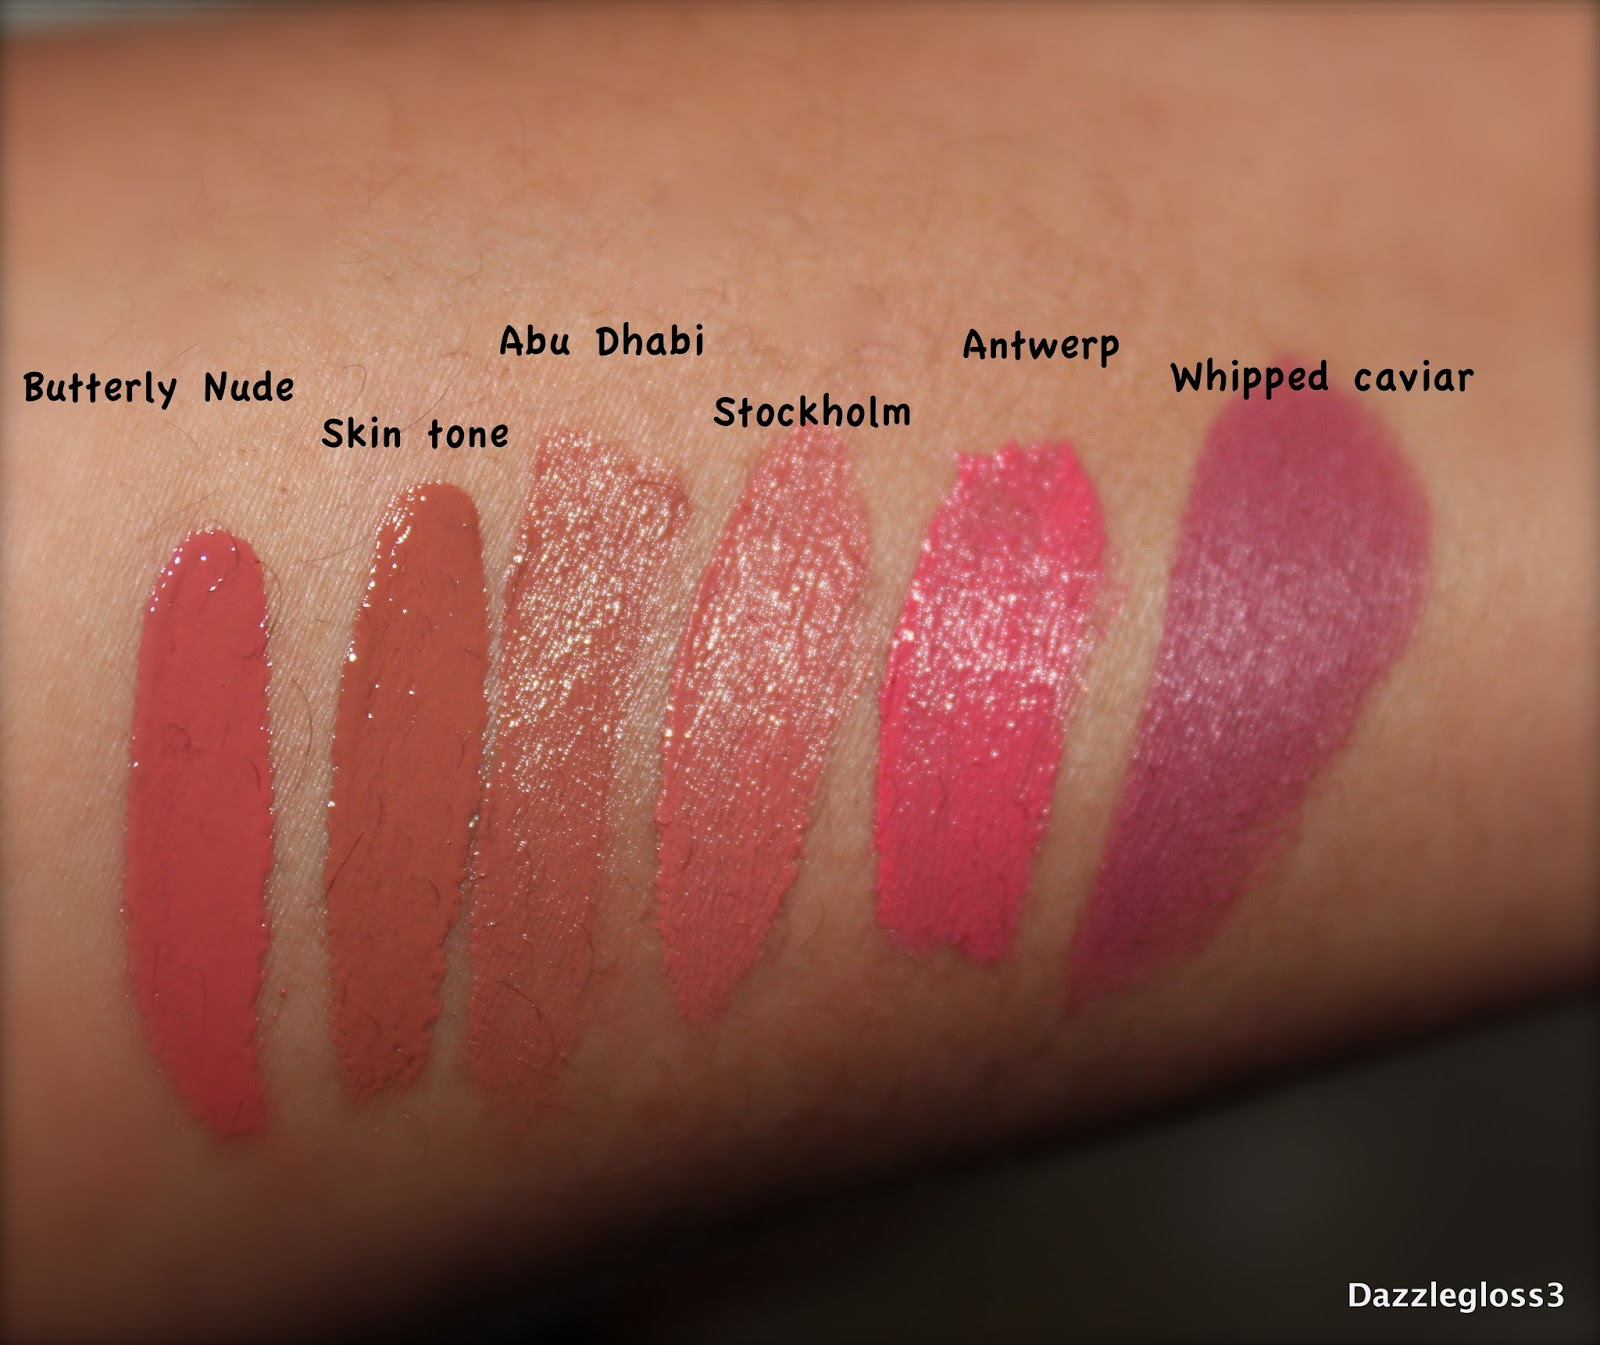 I will start with the order the swatches are in. 